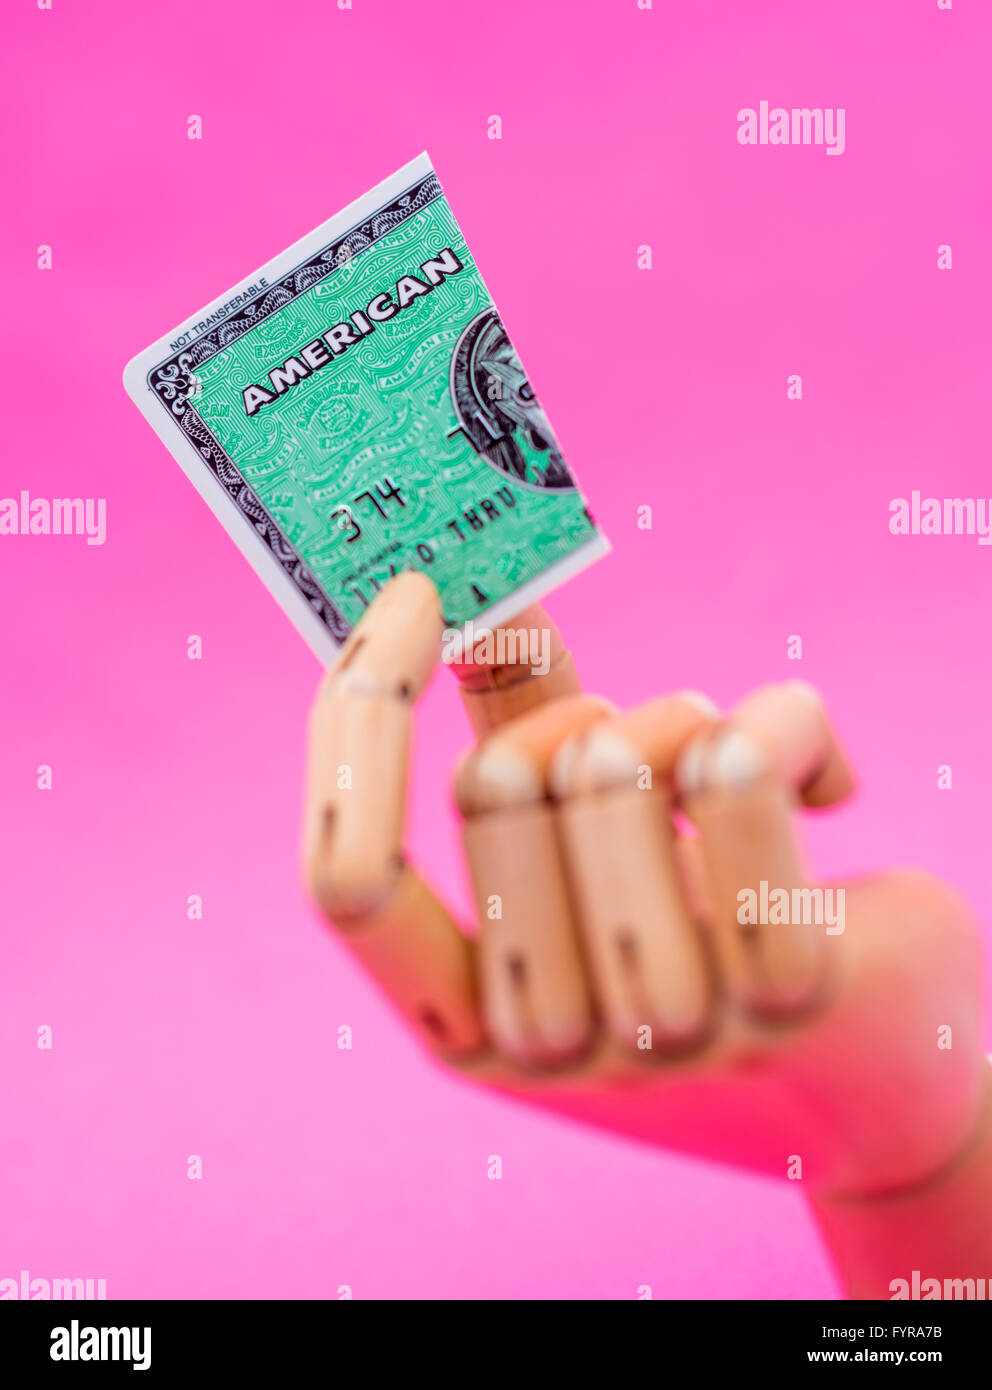 Wooden mannequin hand holding an American Express card that has been cut in half Stock Photo